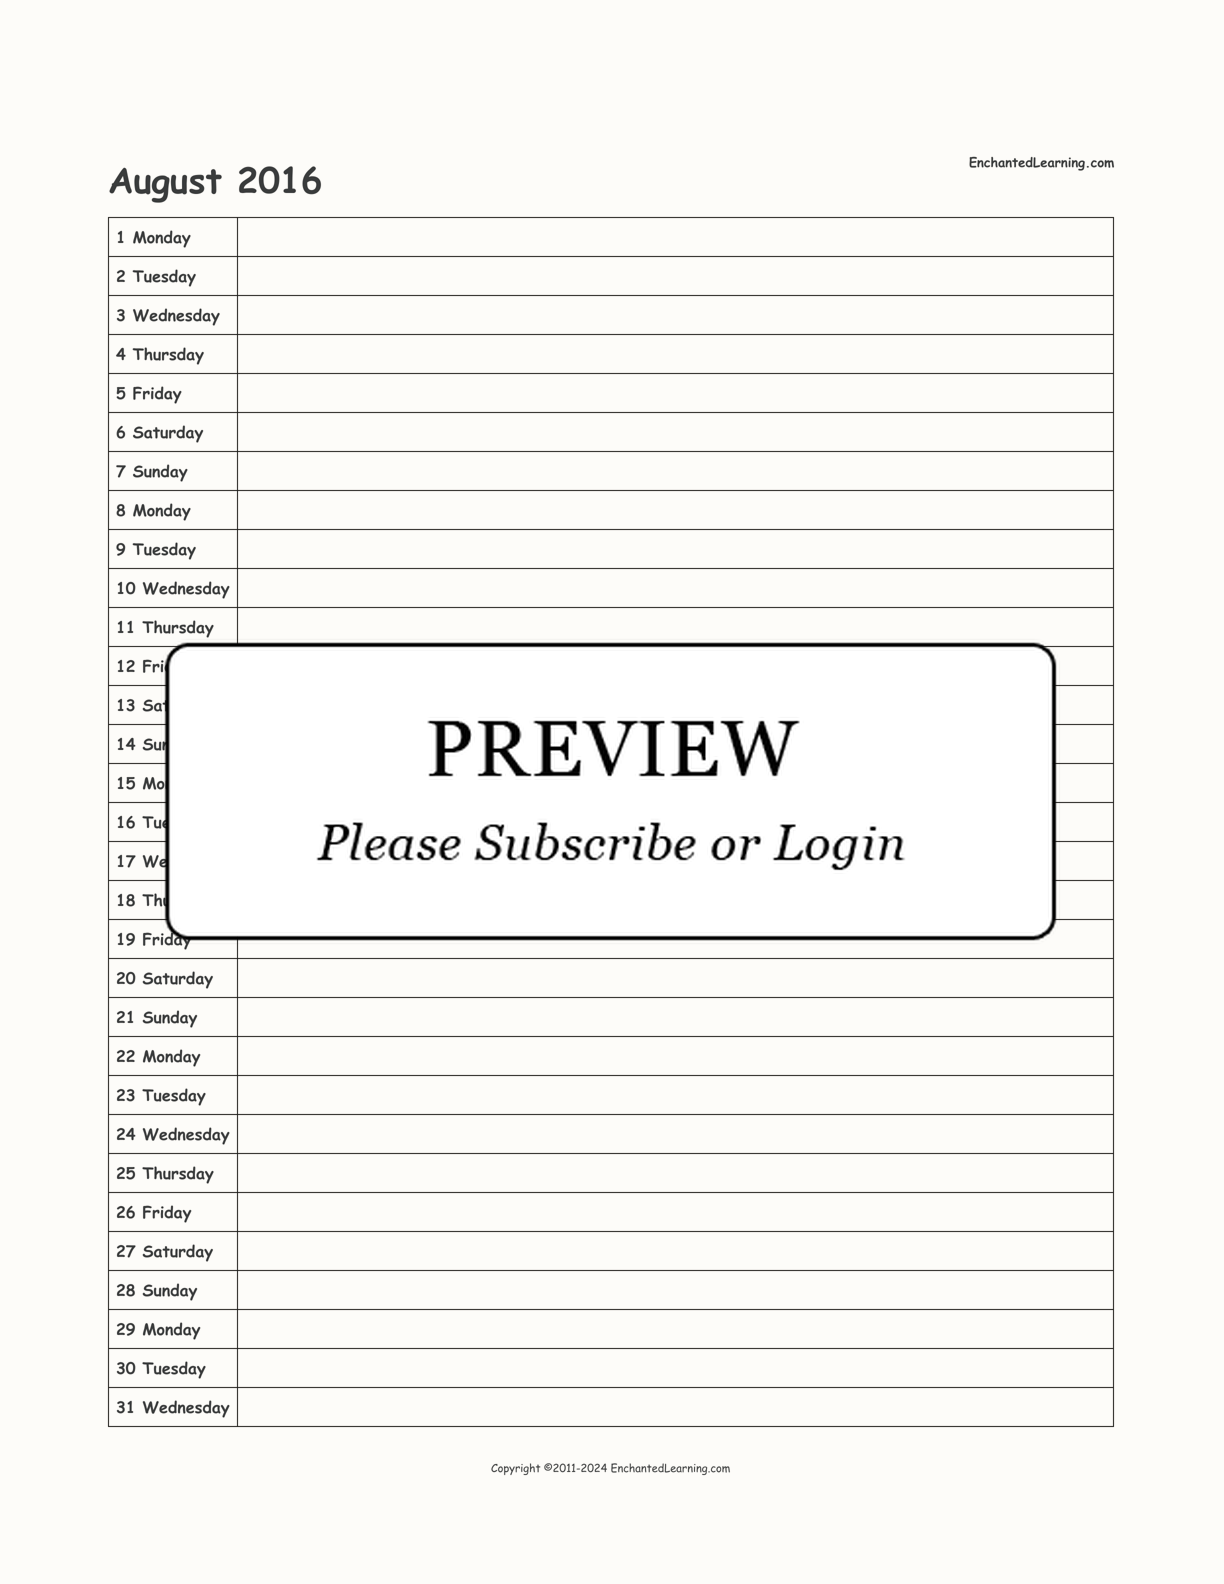 2016 Scheduling Calendar interactive printout page 8